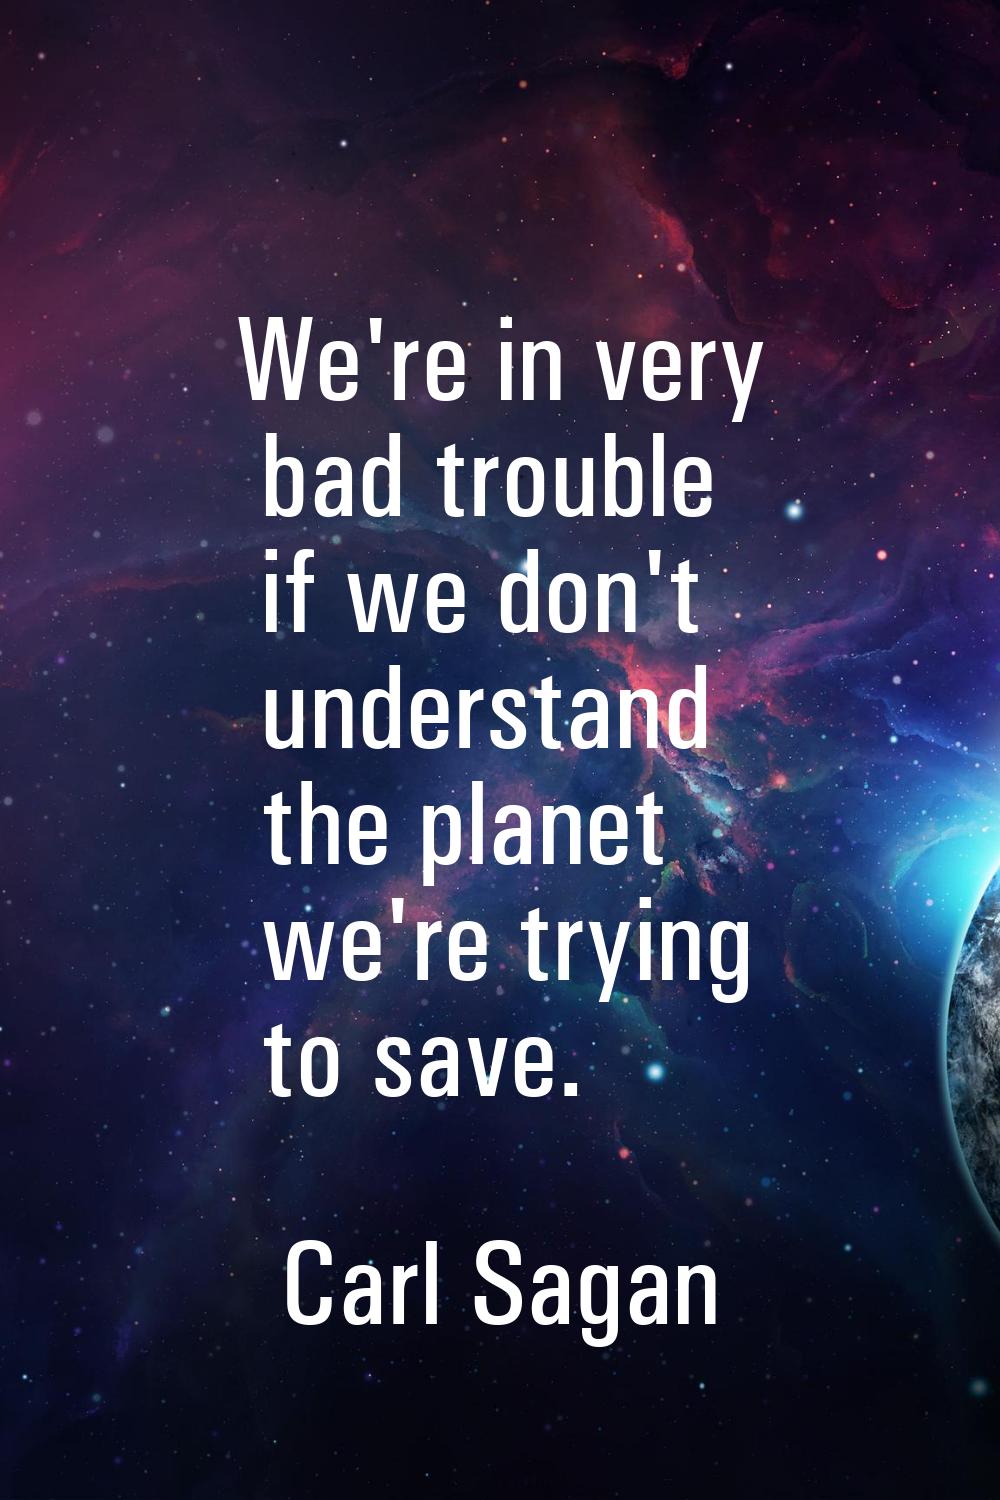 We're in very bad trouble if we don't understand the planet we're trying to save.